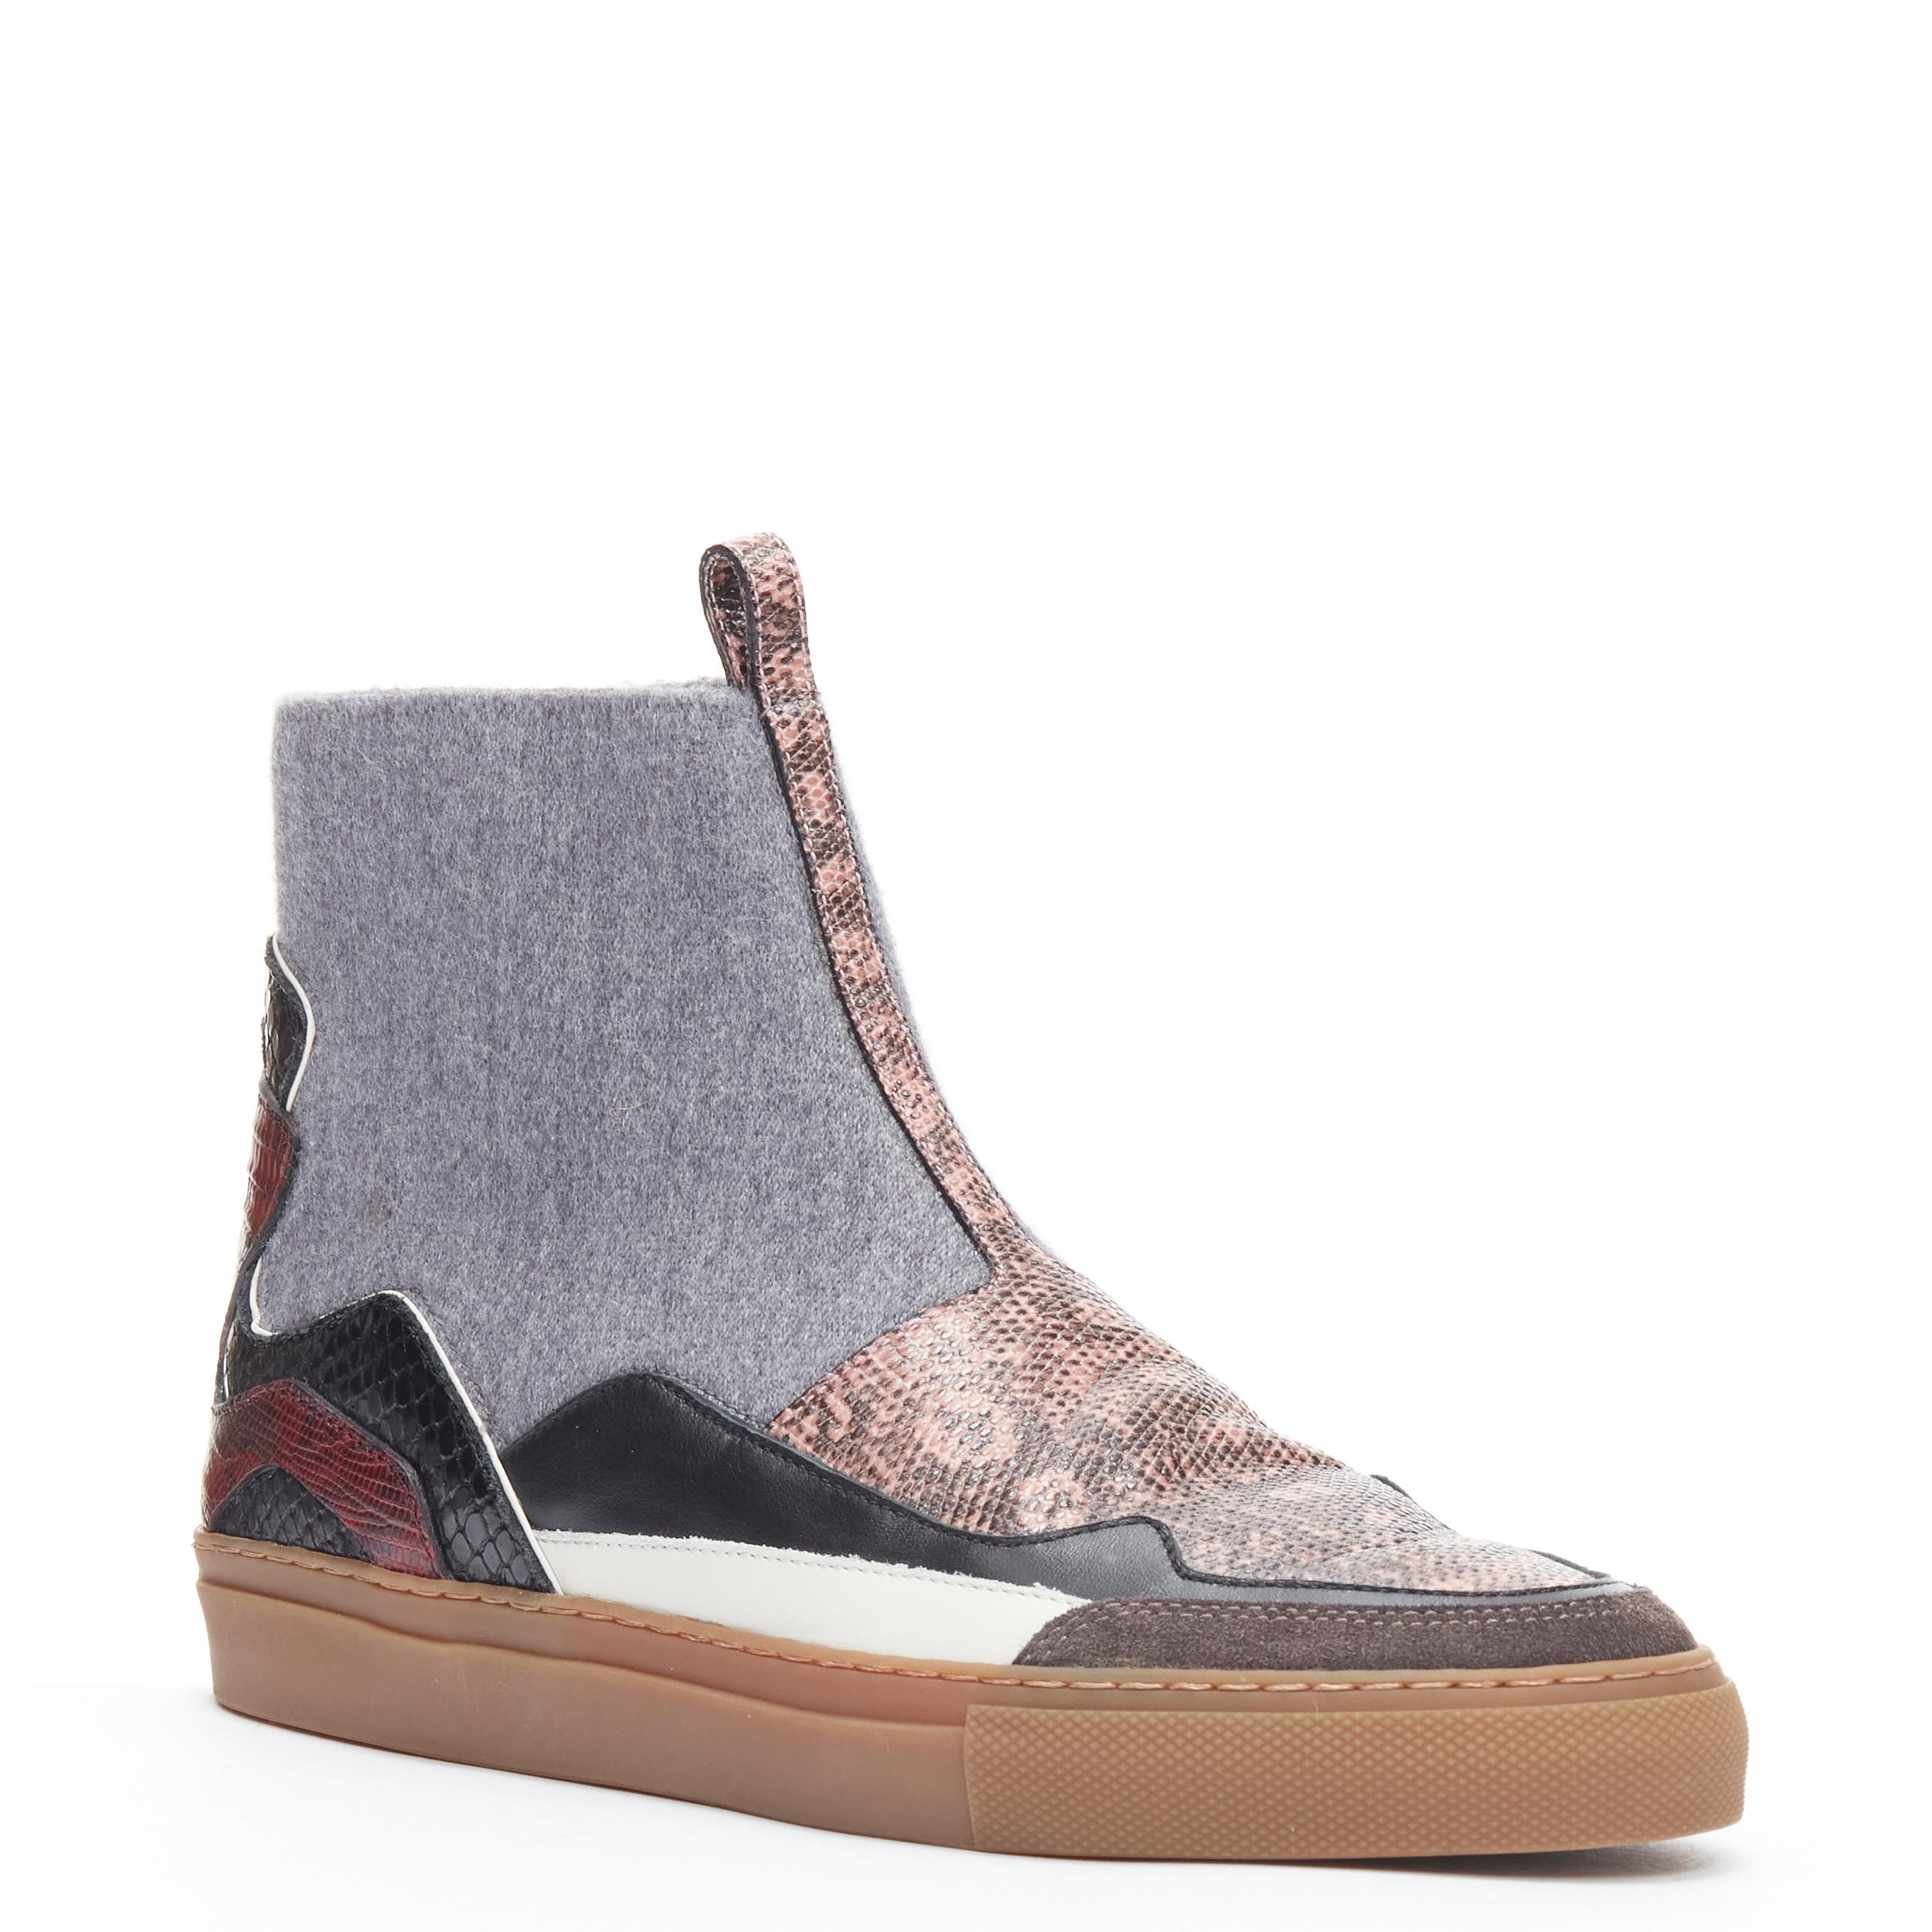 new DRIES VAN NOTEN pink black printed leather grey wool high top sneaker EU37 
Reference: CELG/A00231 
Brand: Dries Van Noten 
Designer: Dries Van Noten 
Material: Leather 
Color: Pink 
Closure: Stretch 
Extra Detail: Grey wool felt upper. Black